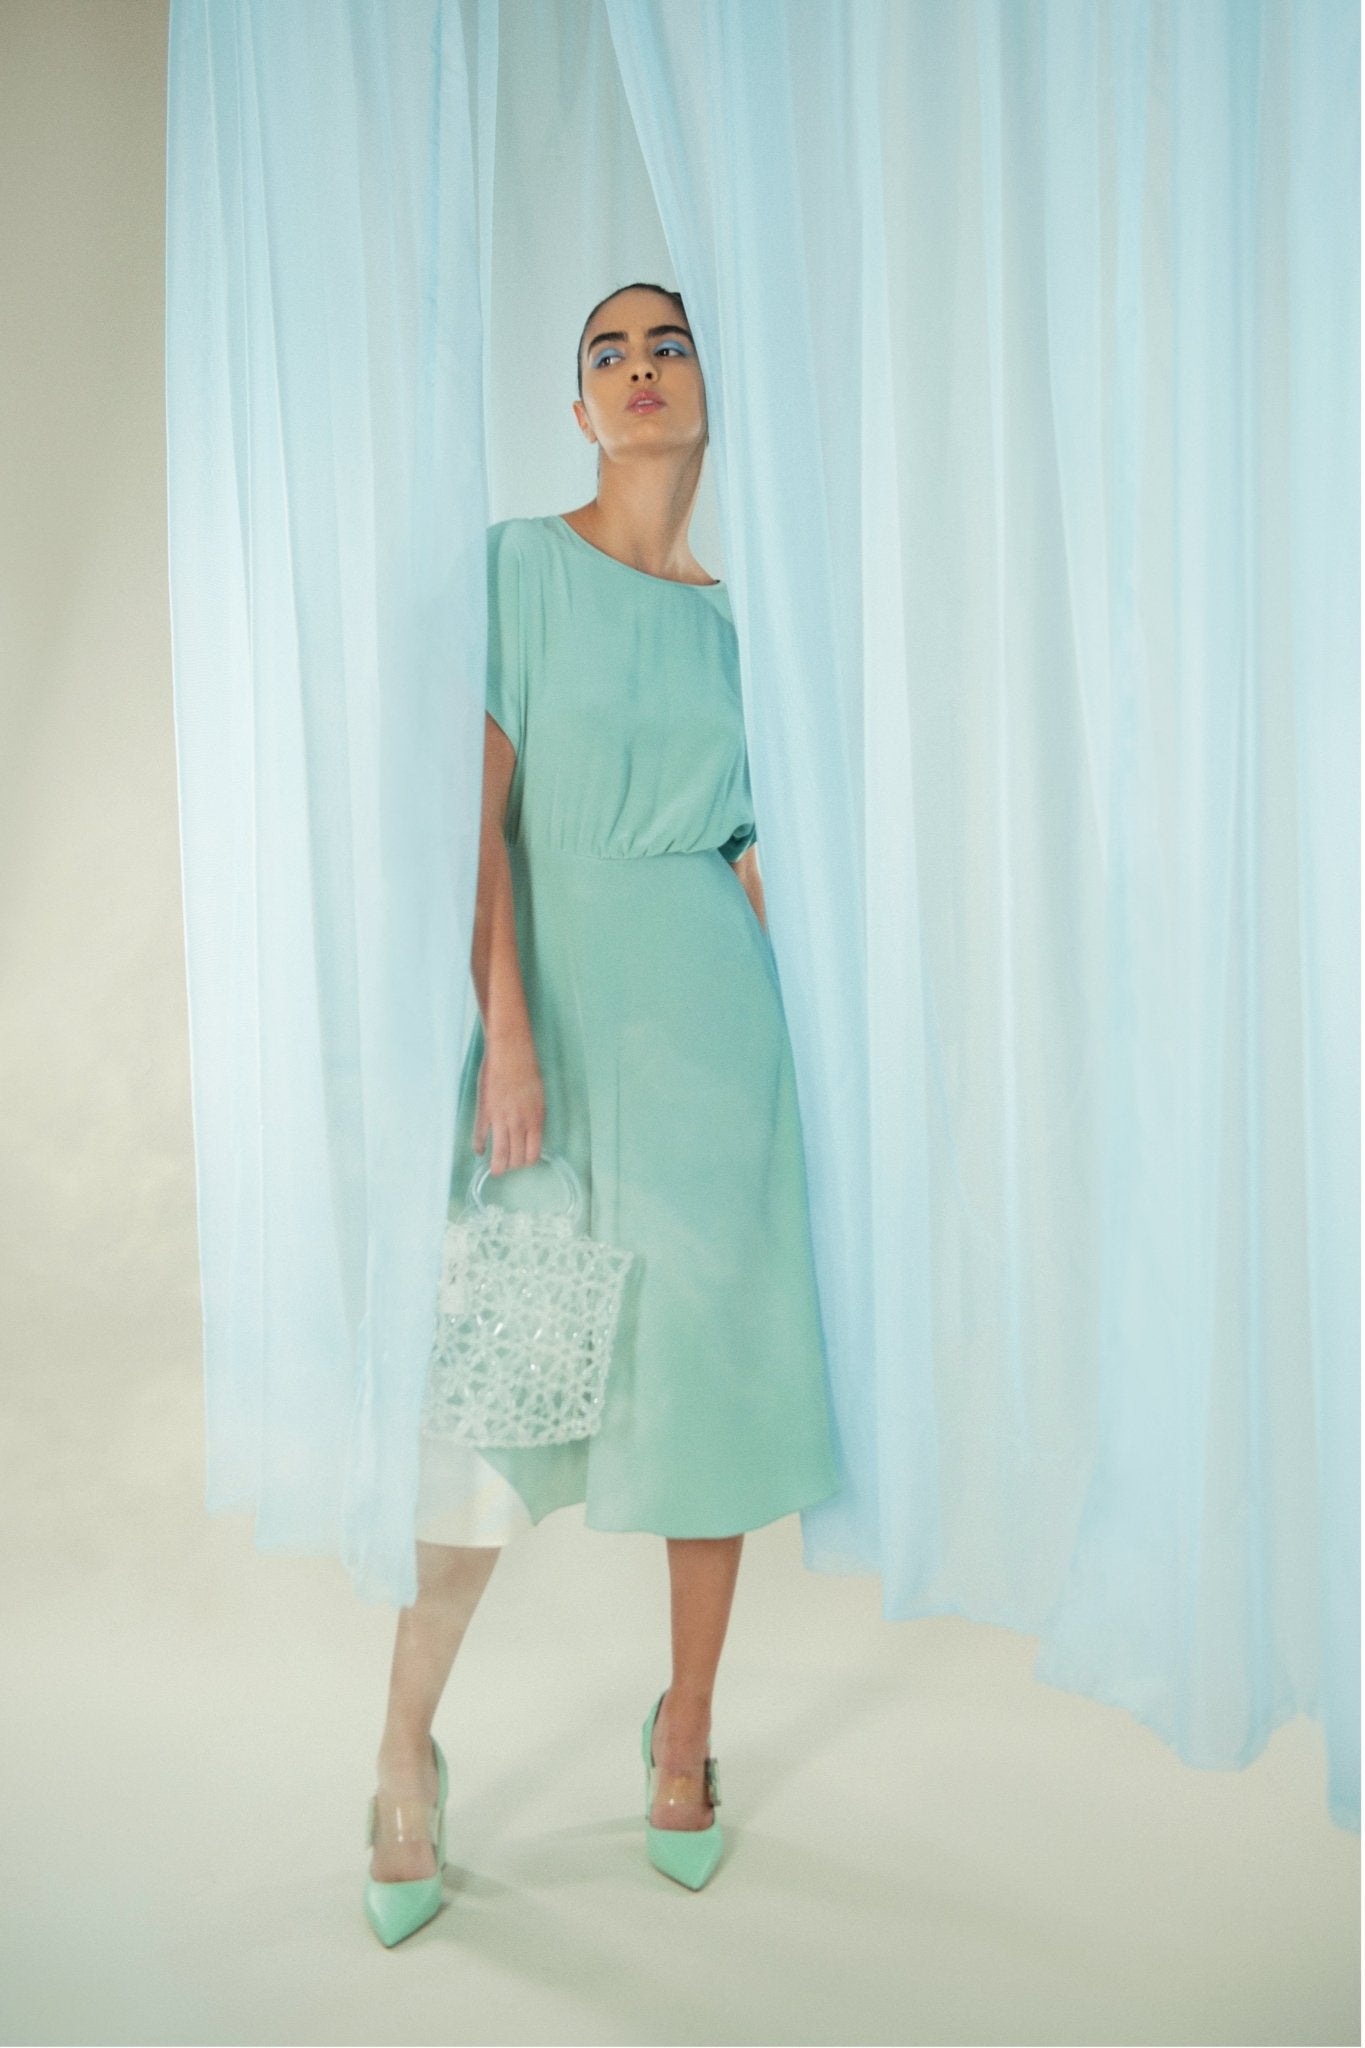 Blue Hand Dyed Silk Misty Marbled Dress - Edward Mongzar - The Clothing LoungeEdward Mongzar